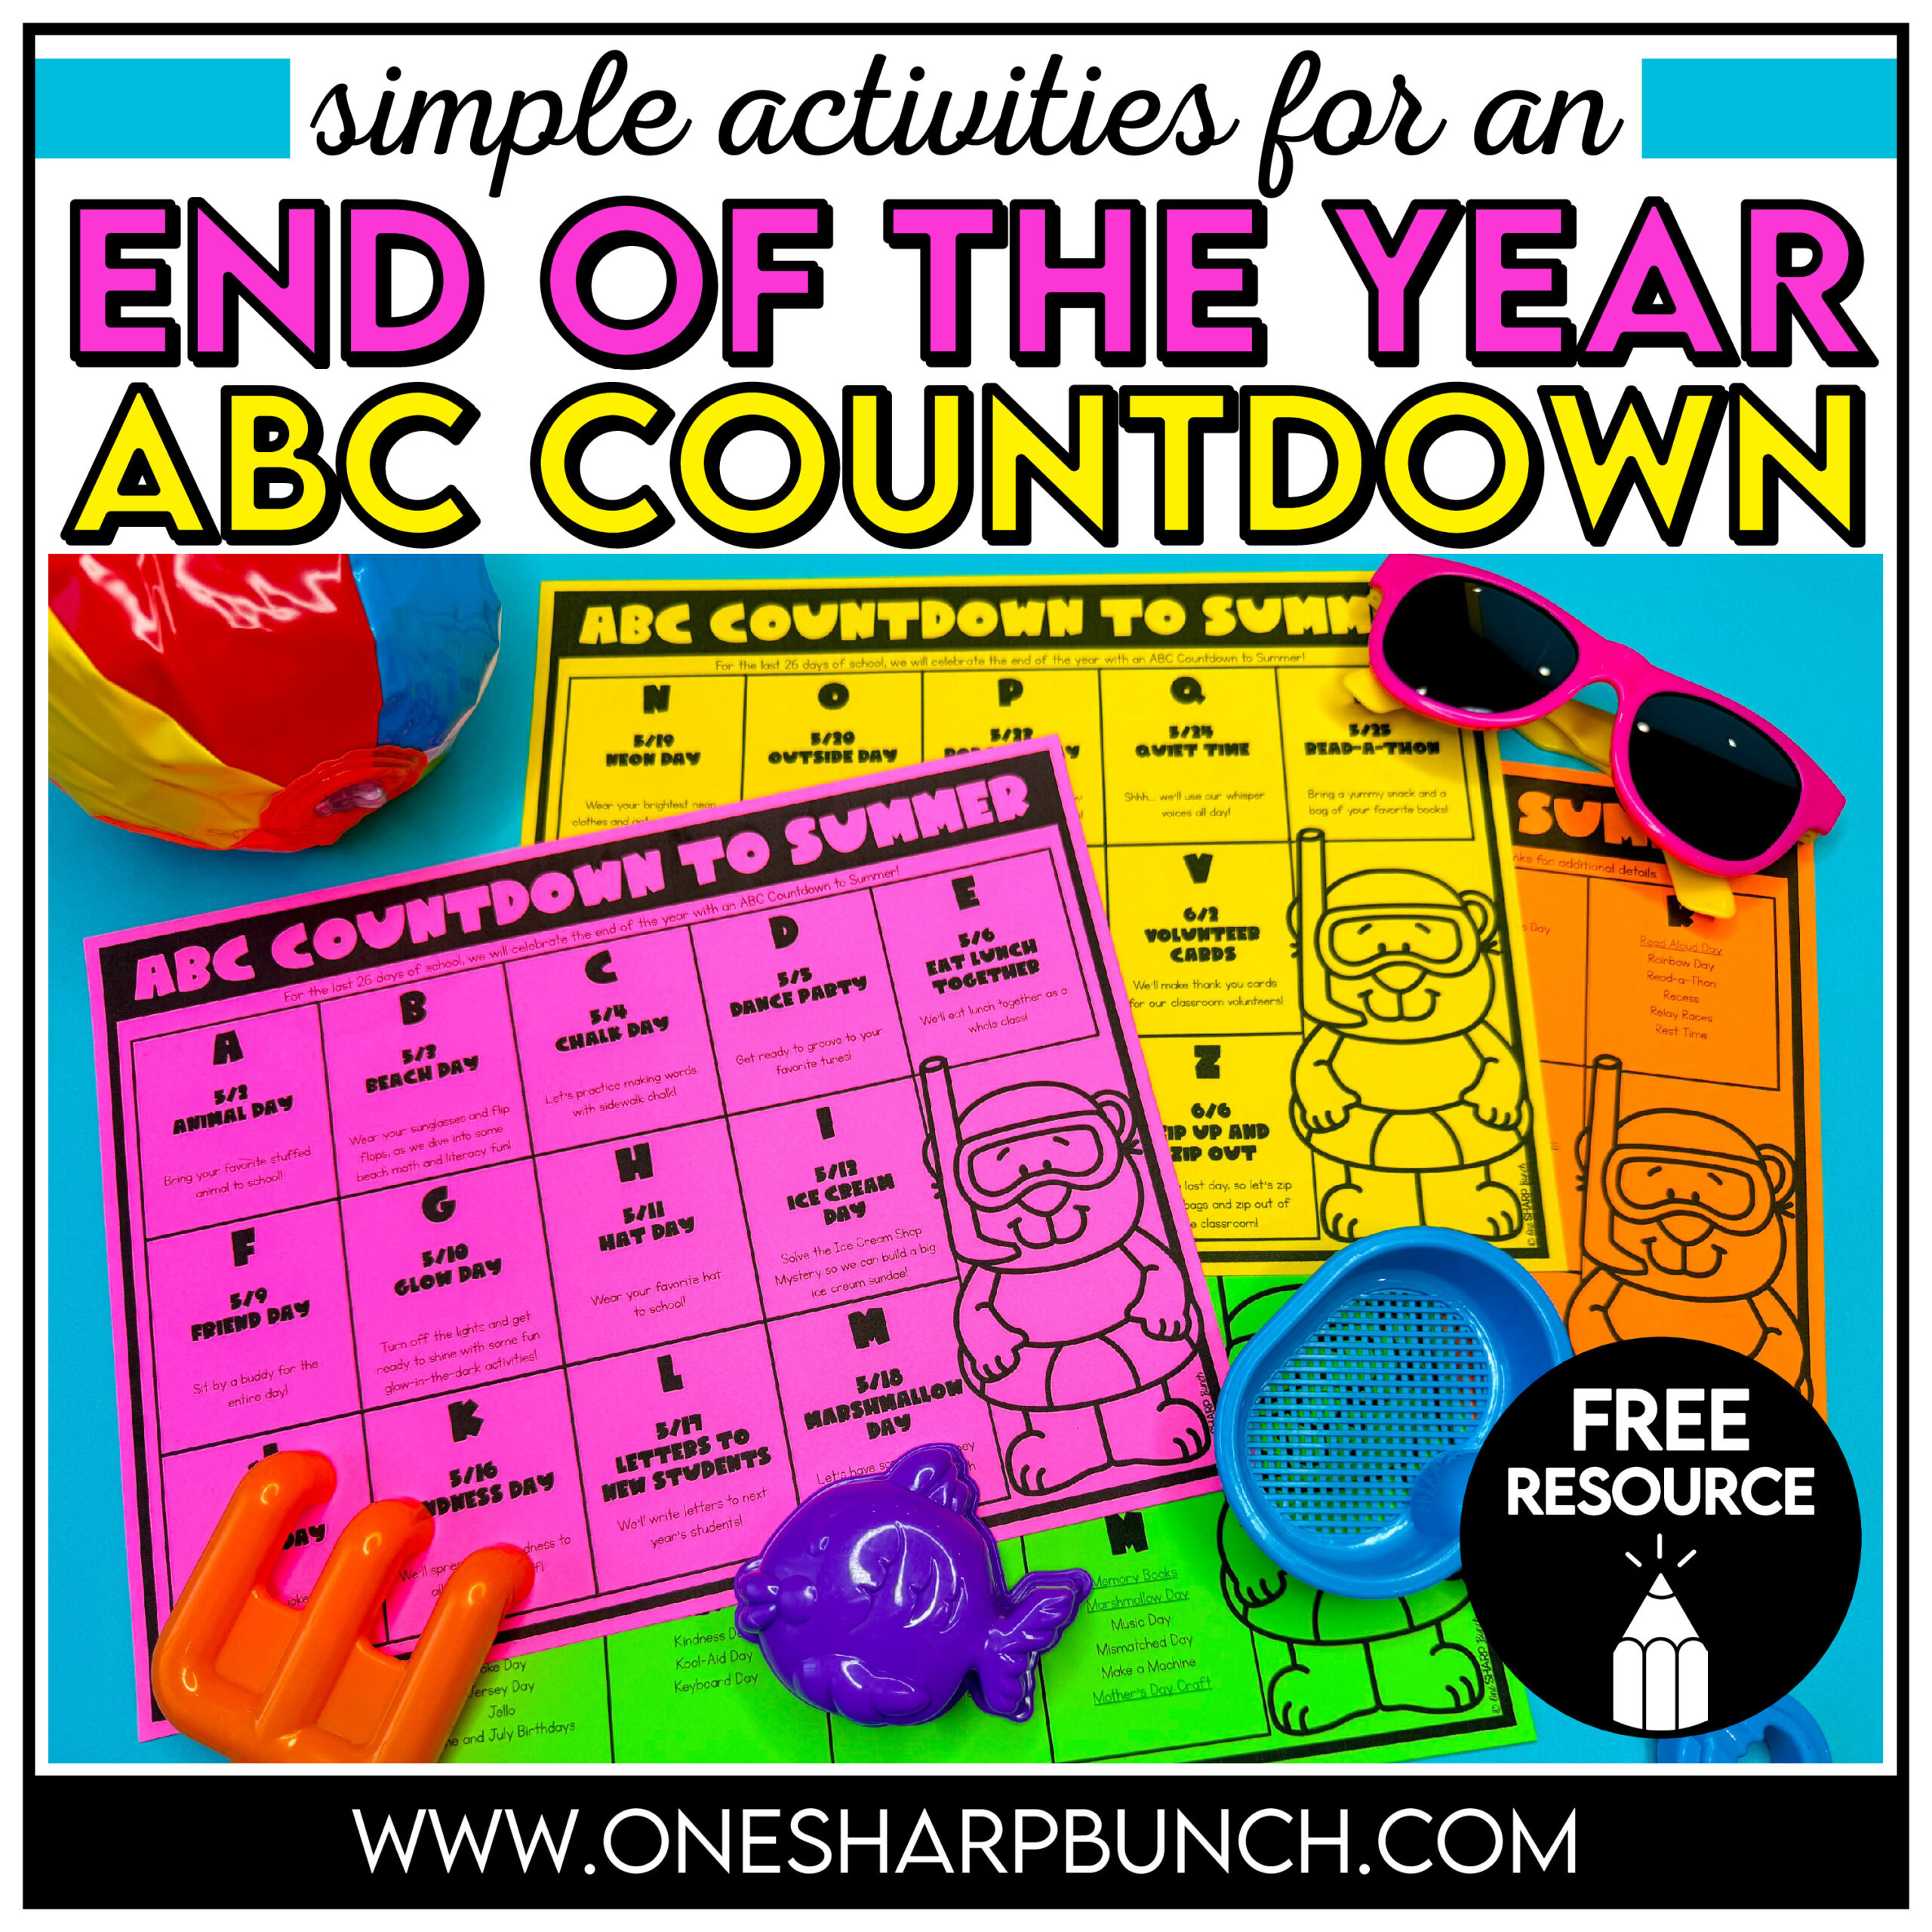 Celebrate the end of the year with these ABC countdown ideas! Use the FREE ABC countdown calendar to help plan the last 26 days of school! Your students will love these alphabet countdown ideas as they gear up for summer. These end of the year activities are fun but also allow students to continue learning all the way up until the last day of school. The ABC countdown to summer activities include classroom theme days, reading end of the year books, end of the year crafts, silly days and more!